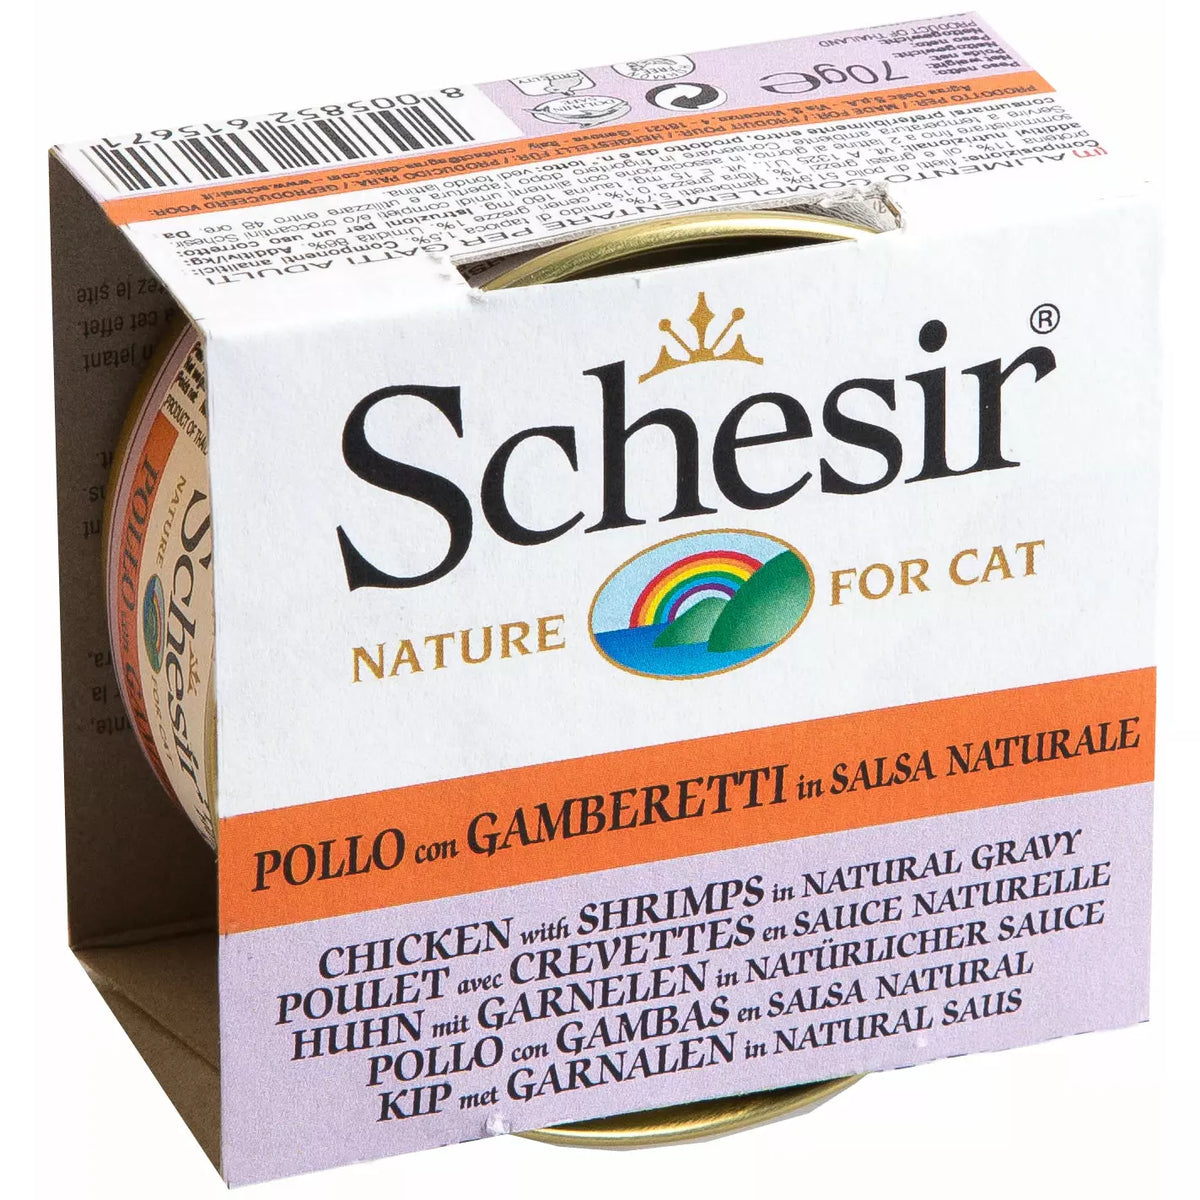 Schesir Chicken with Shrimps in Natural Gravy (70g) - Wet Canned Cat Food